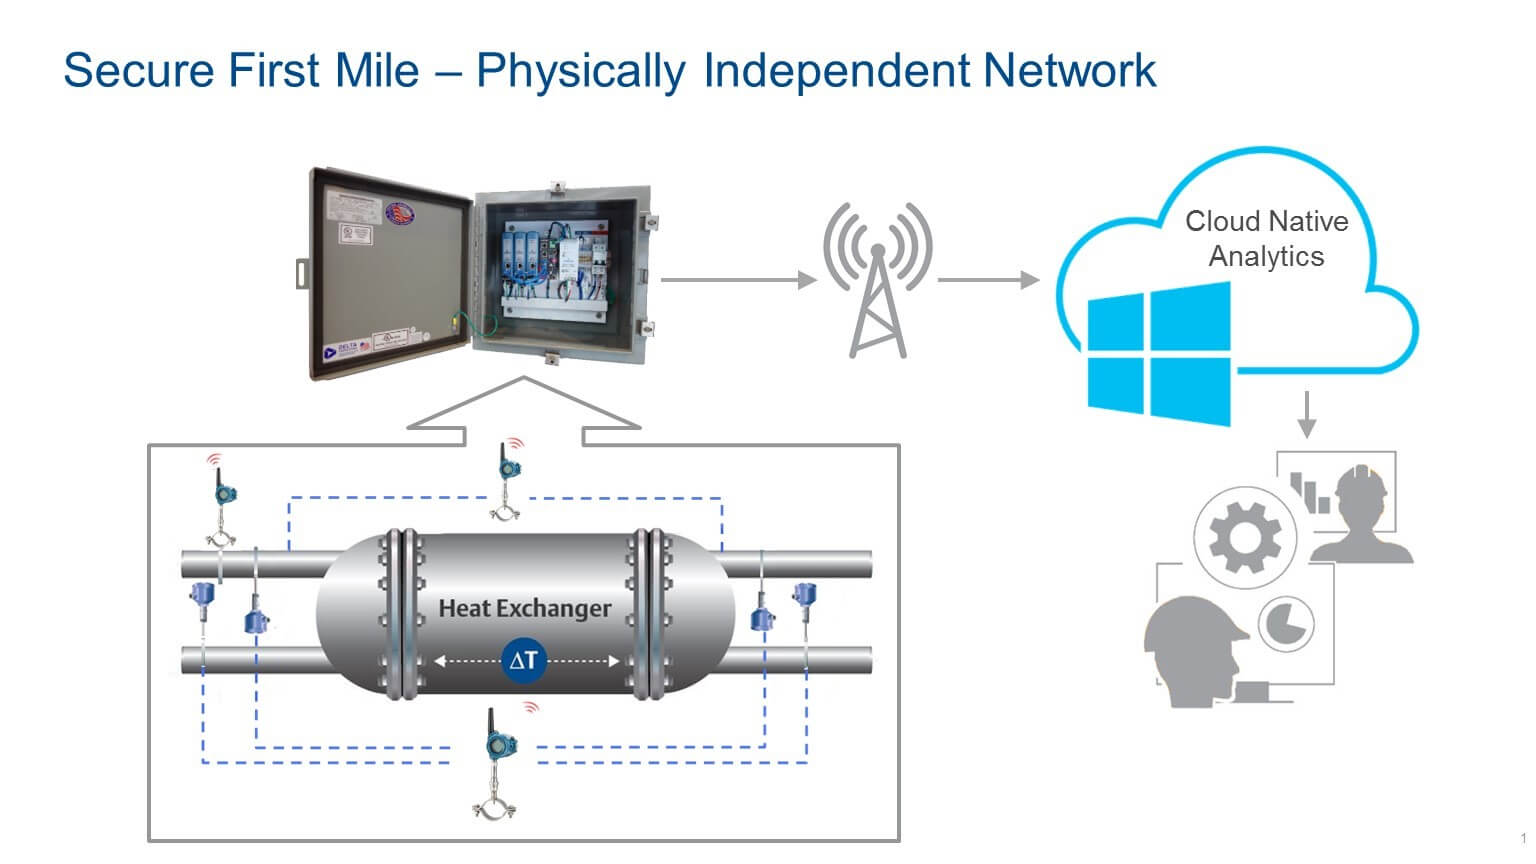 Secure First Mile based on physically-independent wireless architecture